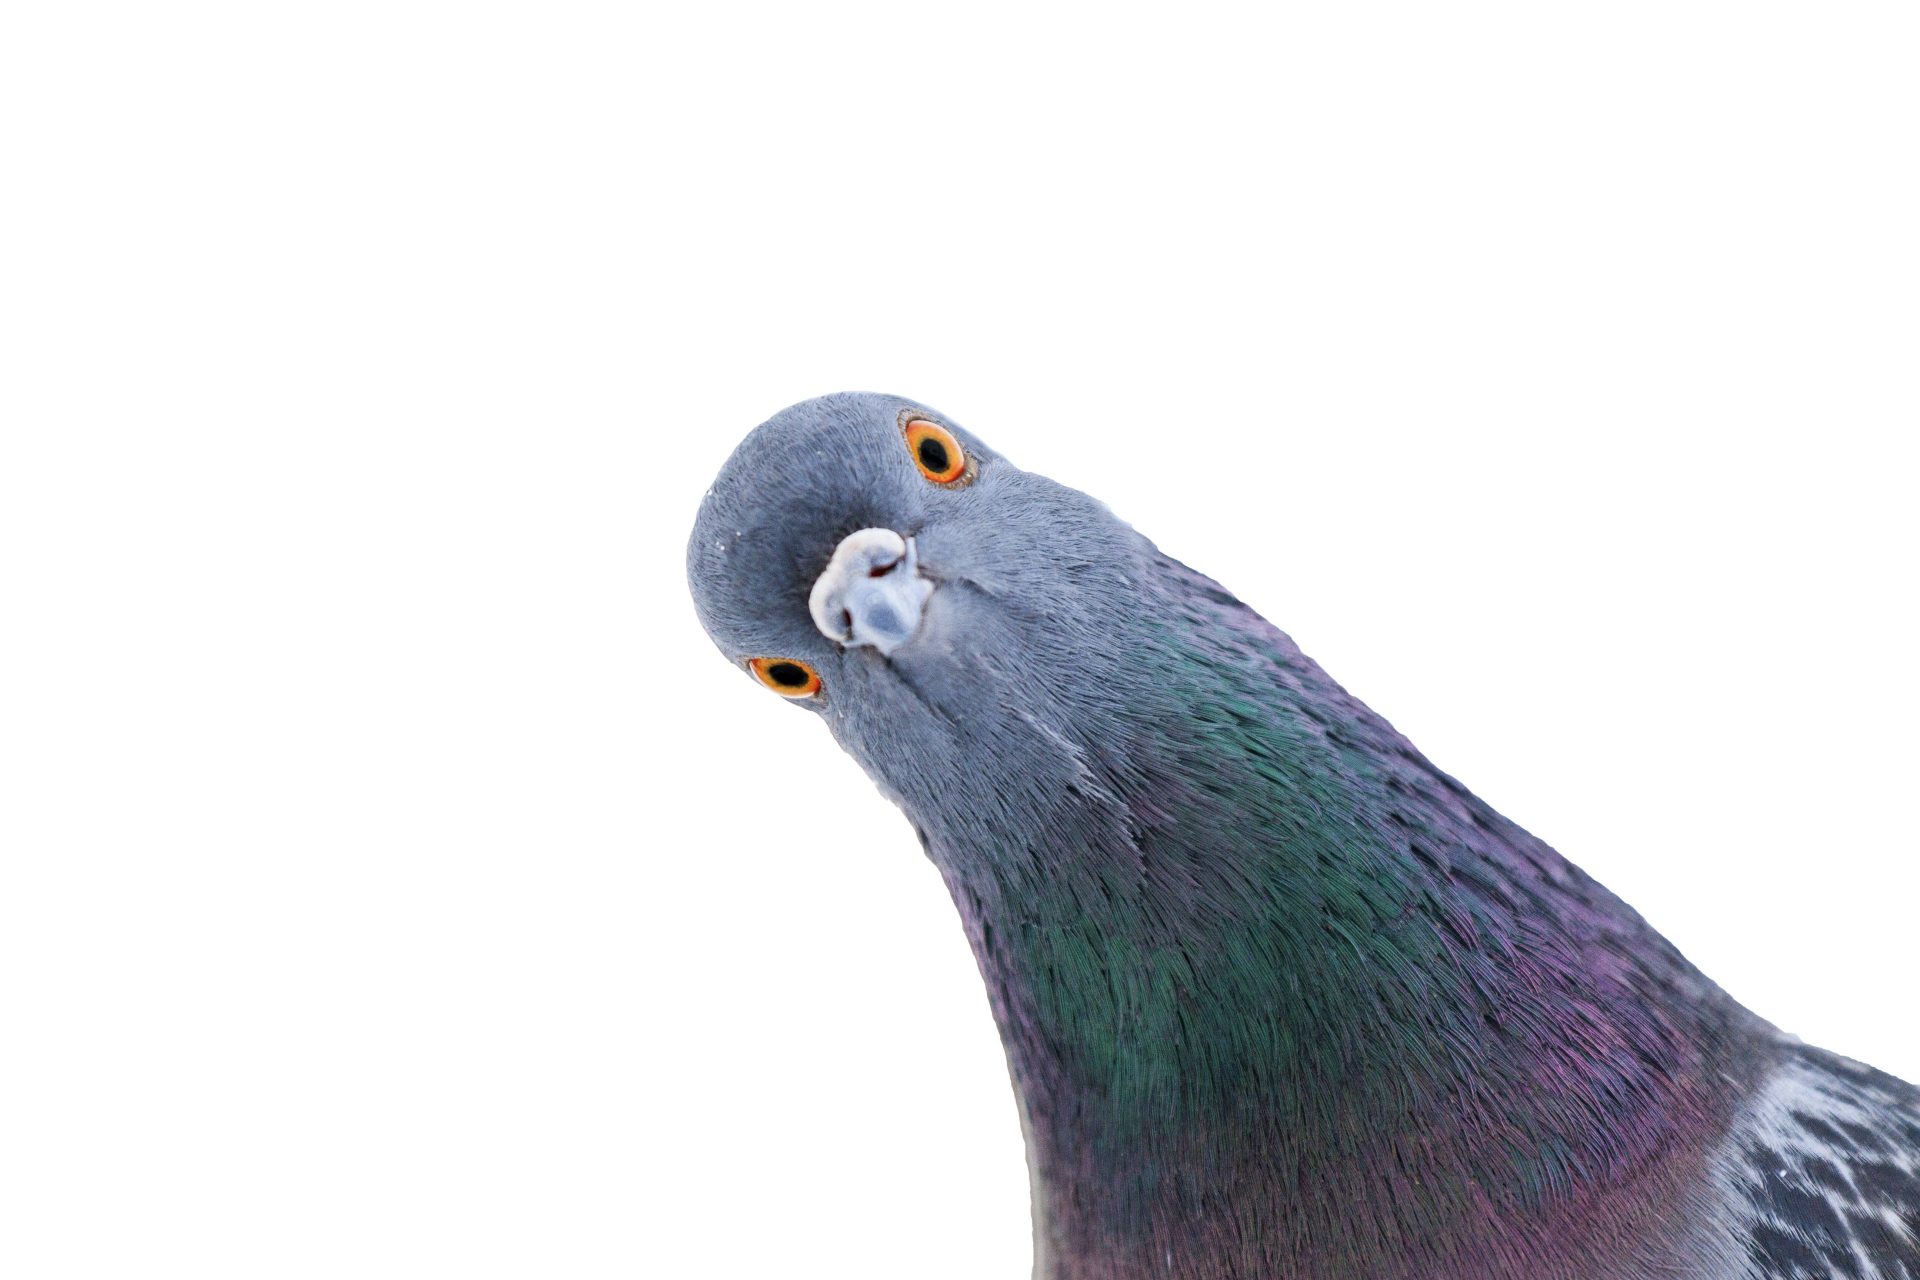 This COVID pigeon myth from Australia is proof folks have lost their minds